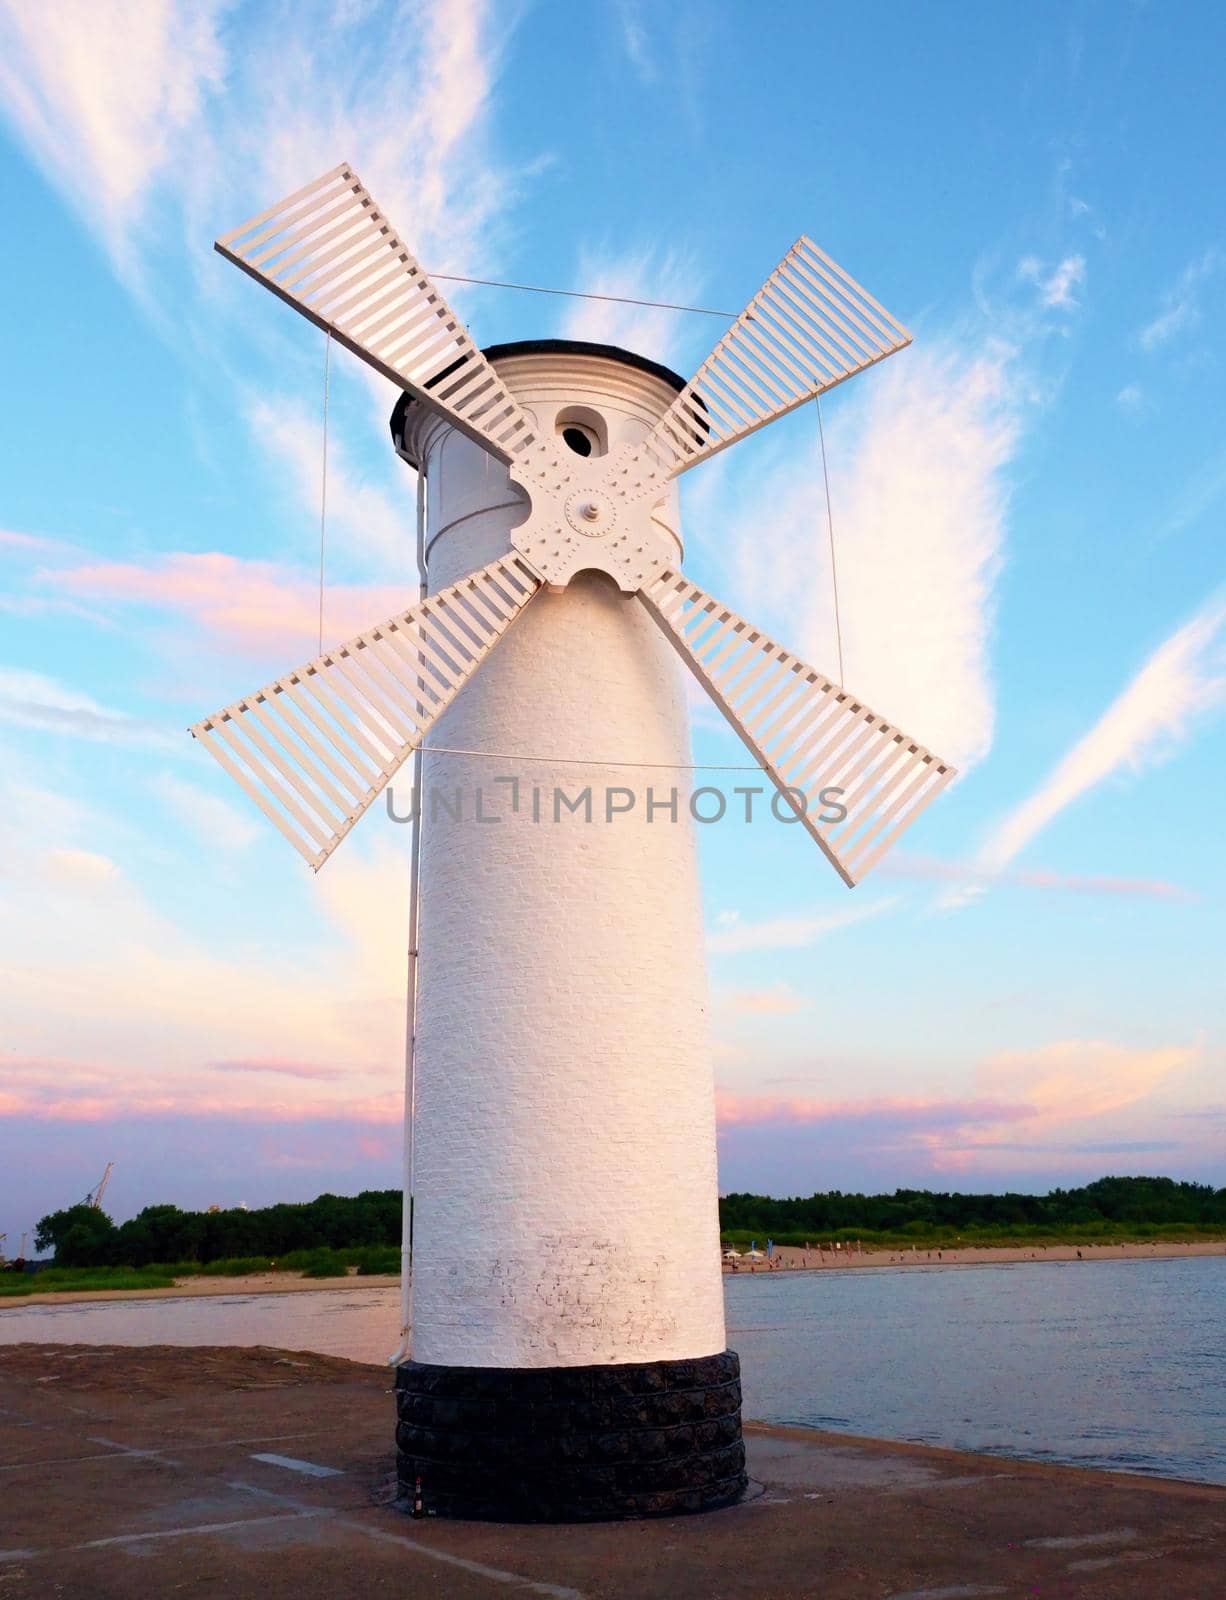 White old lighthouse decorated as windmill by sea on rocky coast. Seascape and landscape in background